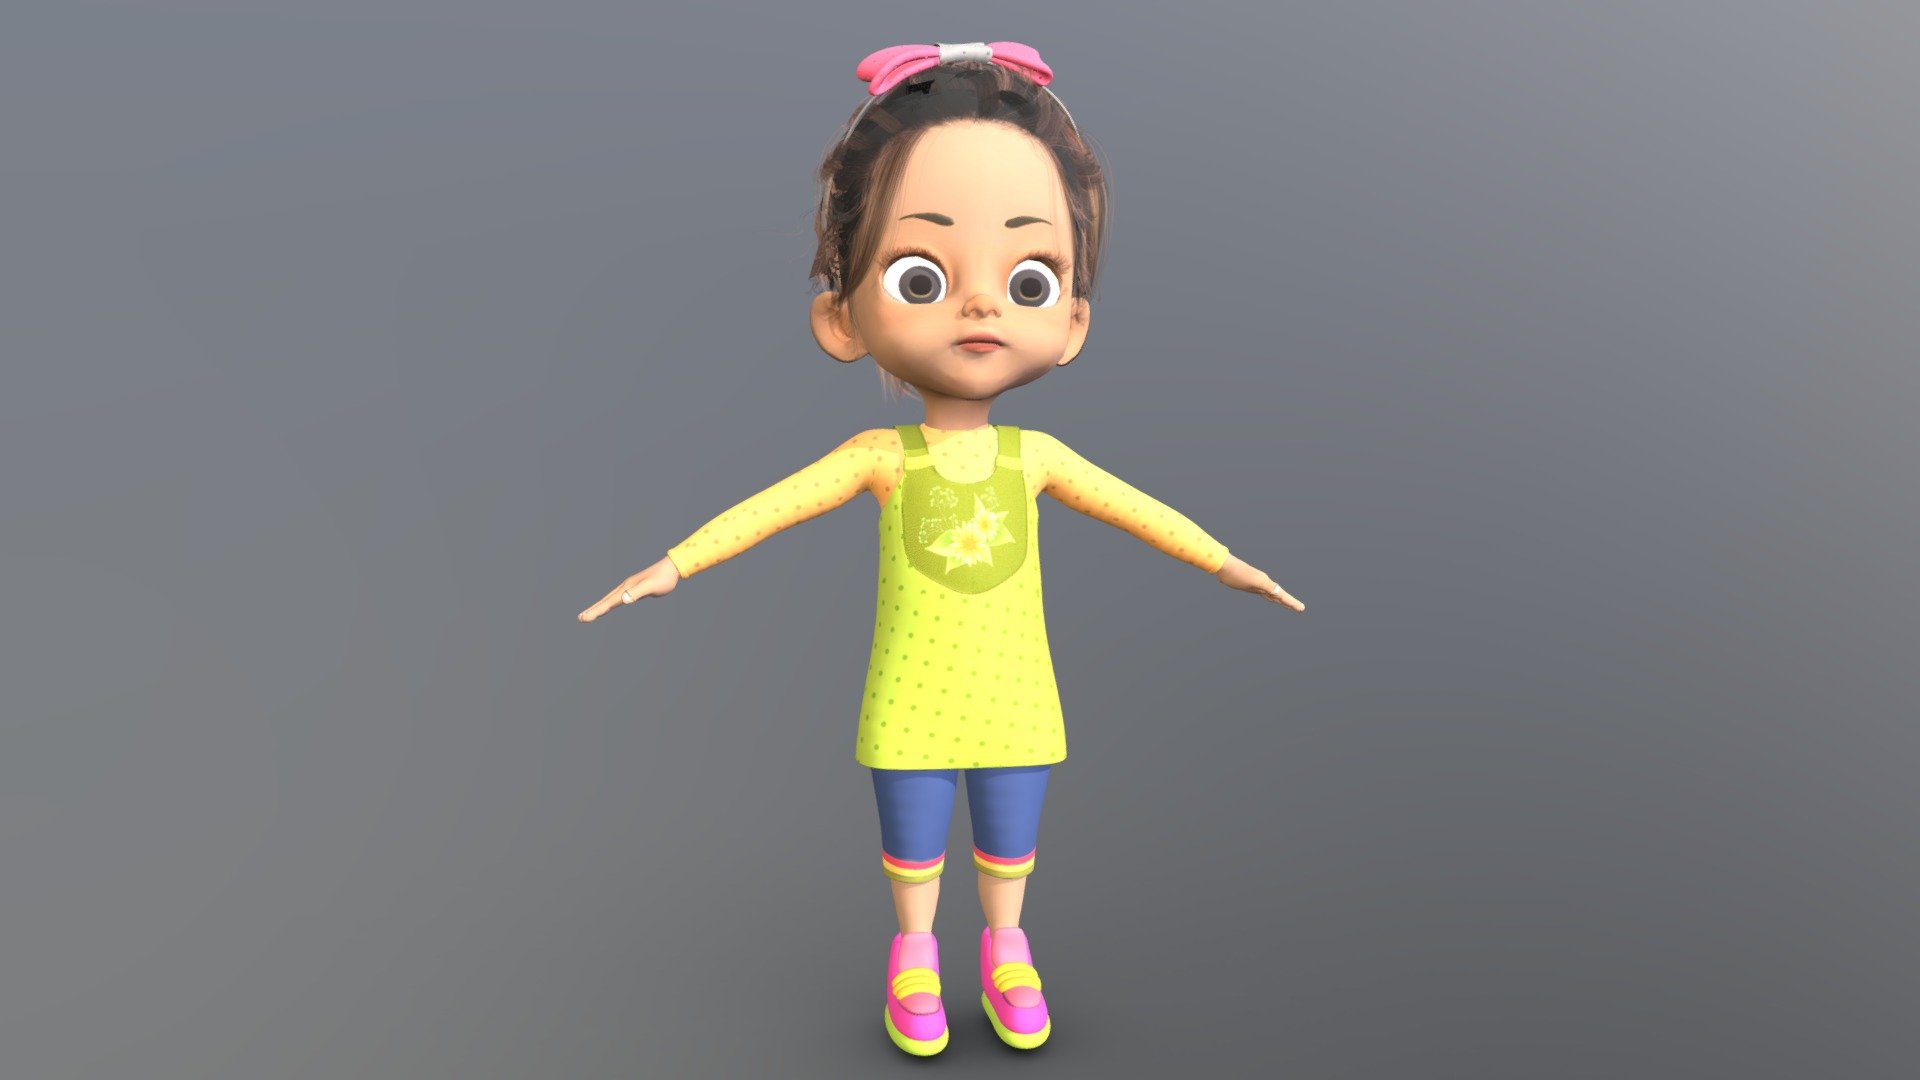 If You Want To Download This Character Contact Me On My Email Or My WhatAapp
WhatsApp Number_+923332889866
Email_heromusab4@gmail.com - REBEKAH GIRL CHARACTER - 3D model by MusabAnsari (@MusabIbnUmar) 3d model